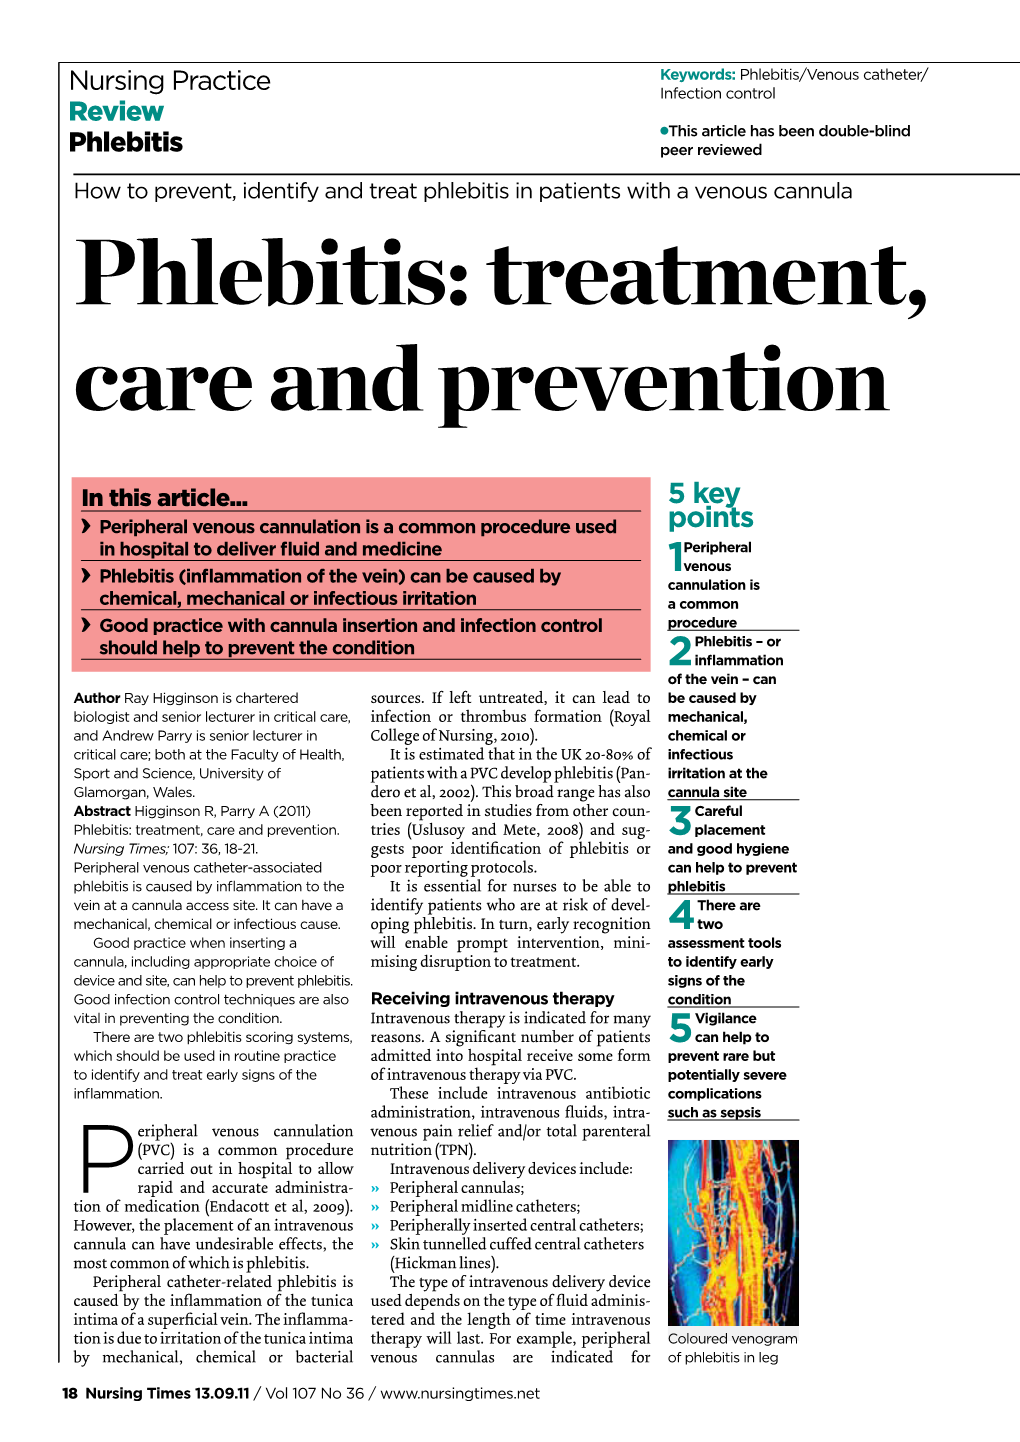 Phlebitis: Treatment, Care and Prevention